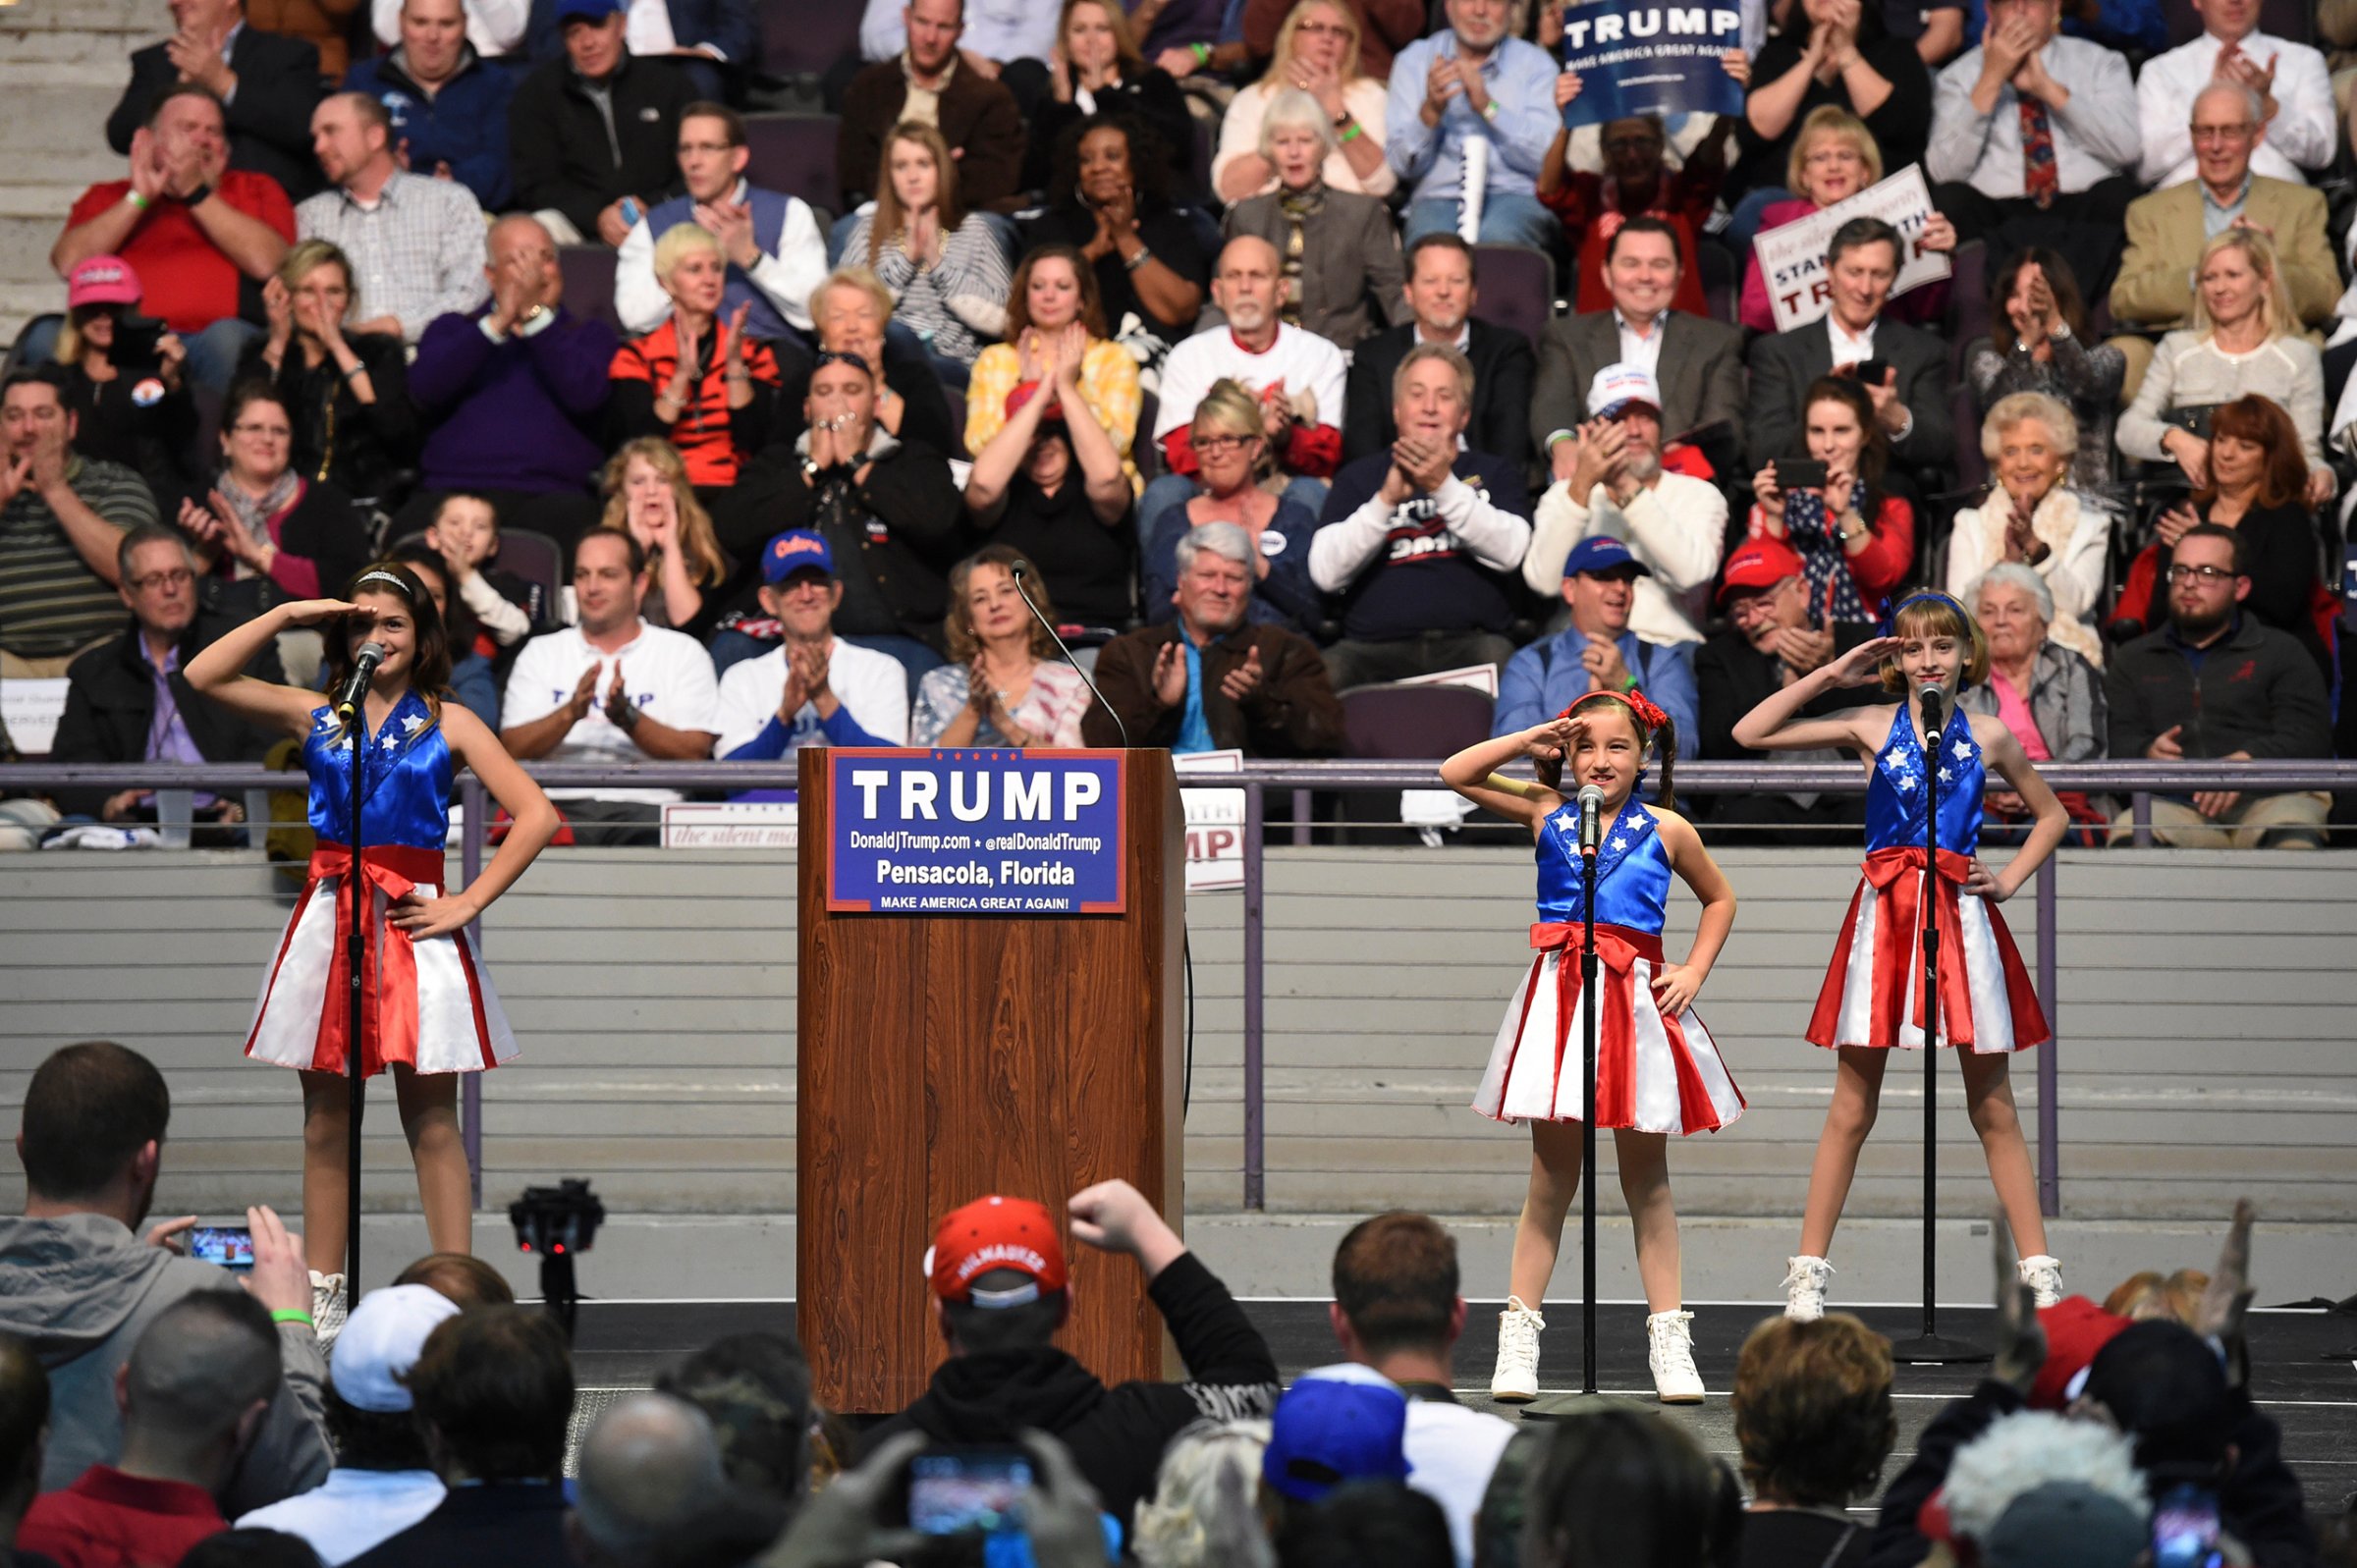 The USA Freedom Kids from Pensacola perform "Freedom's Call" during Donald Trump's campaign rally in Pensacola, Fla., Jan. 13, 2016.